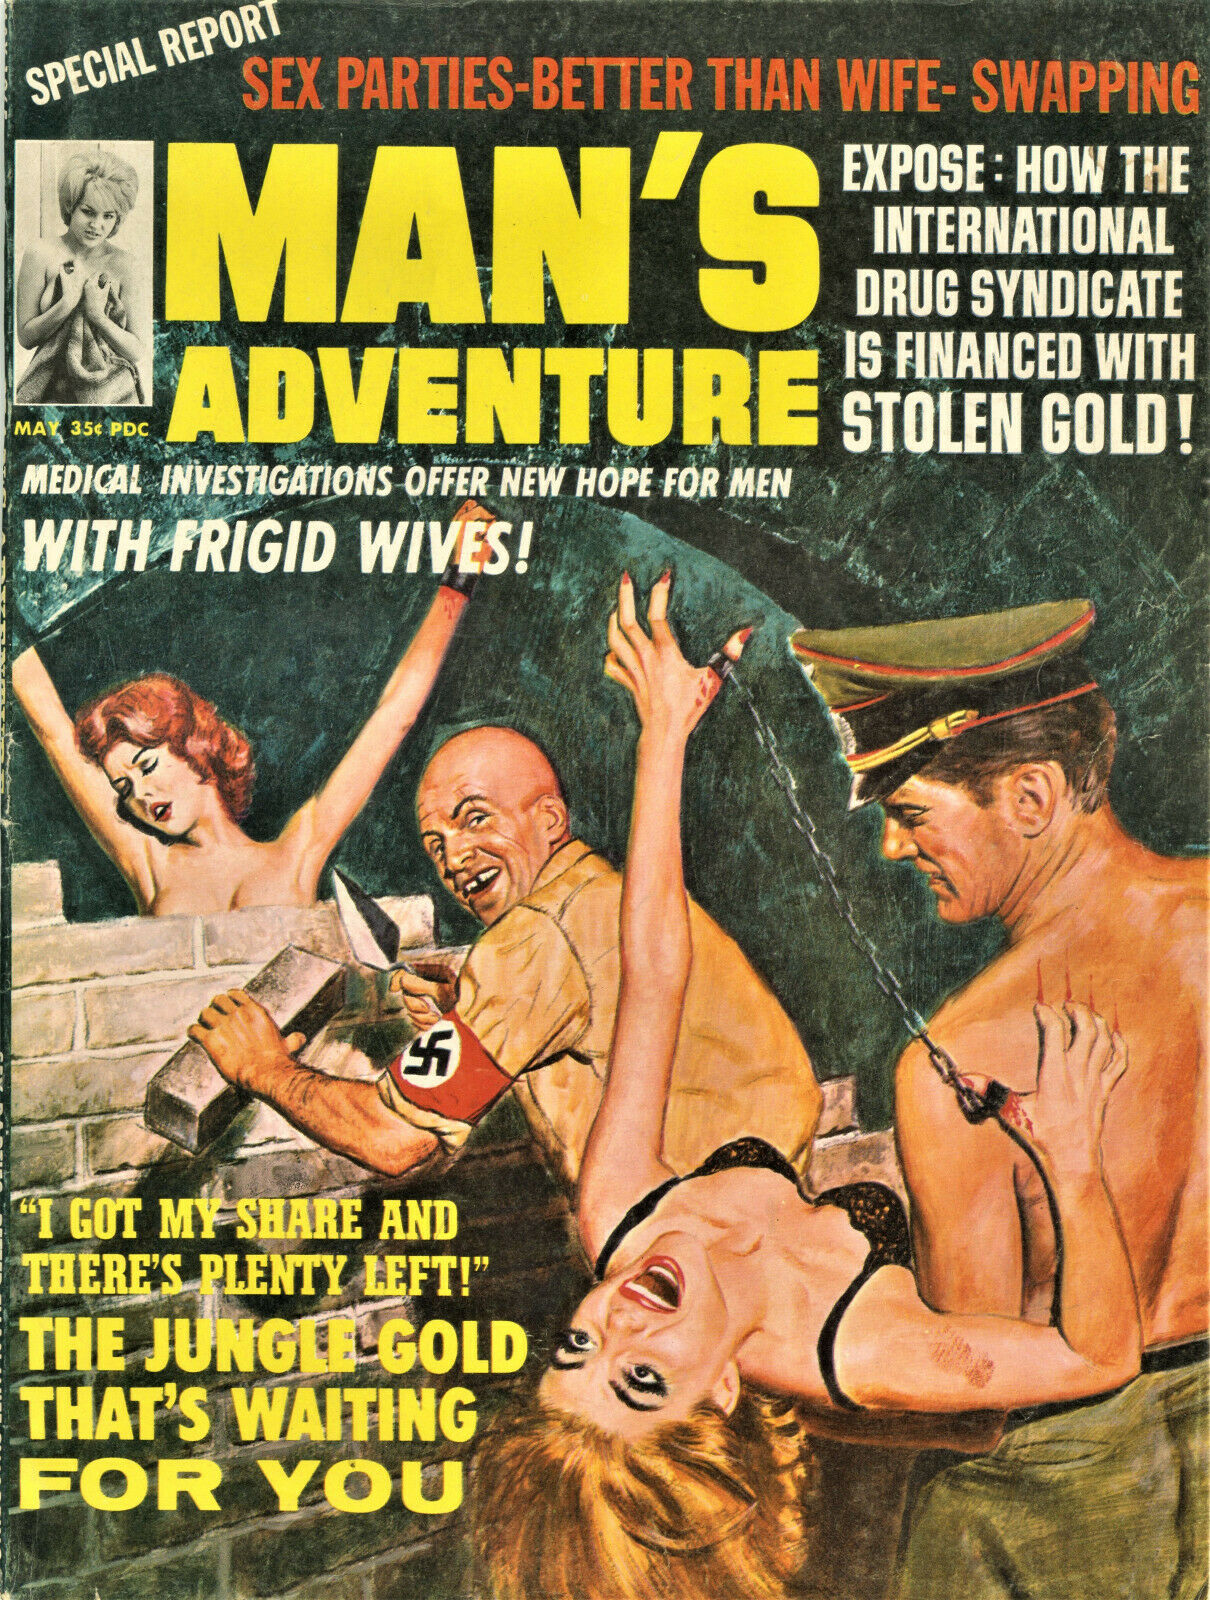 Medical Investigations Offer New Hope For Men With Frigid Wives -- Pulp Covers image